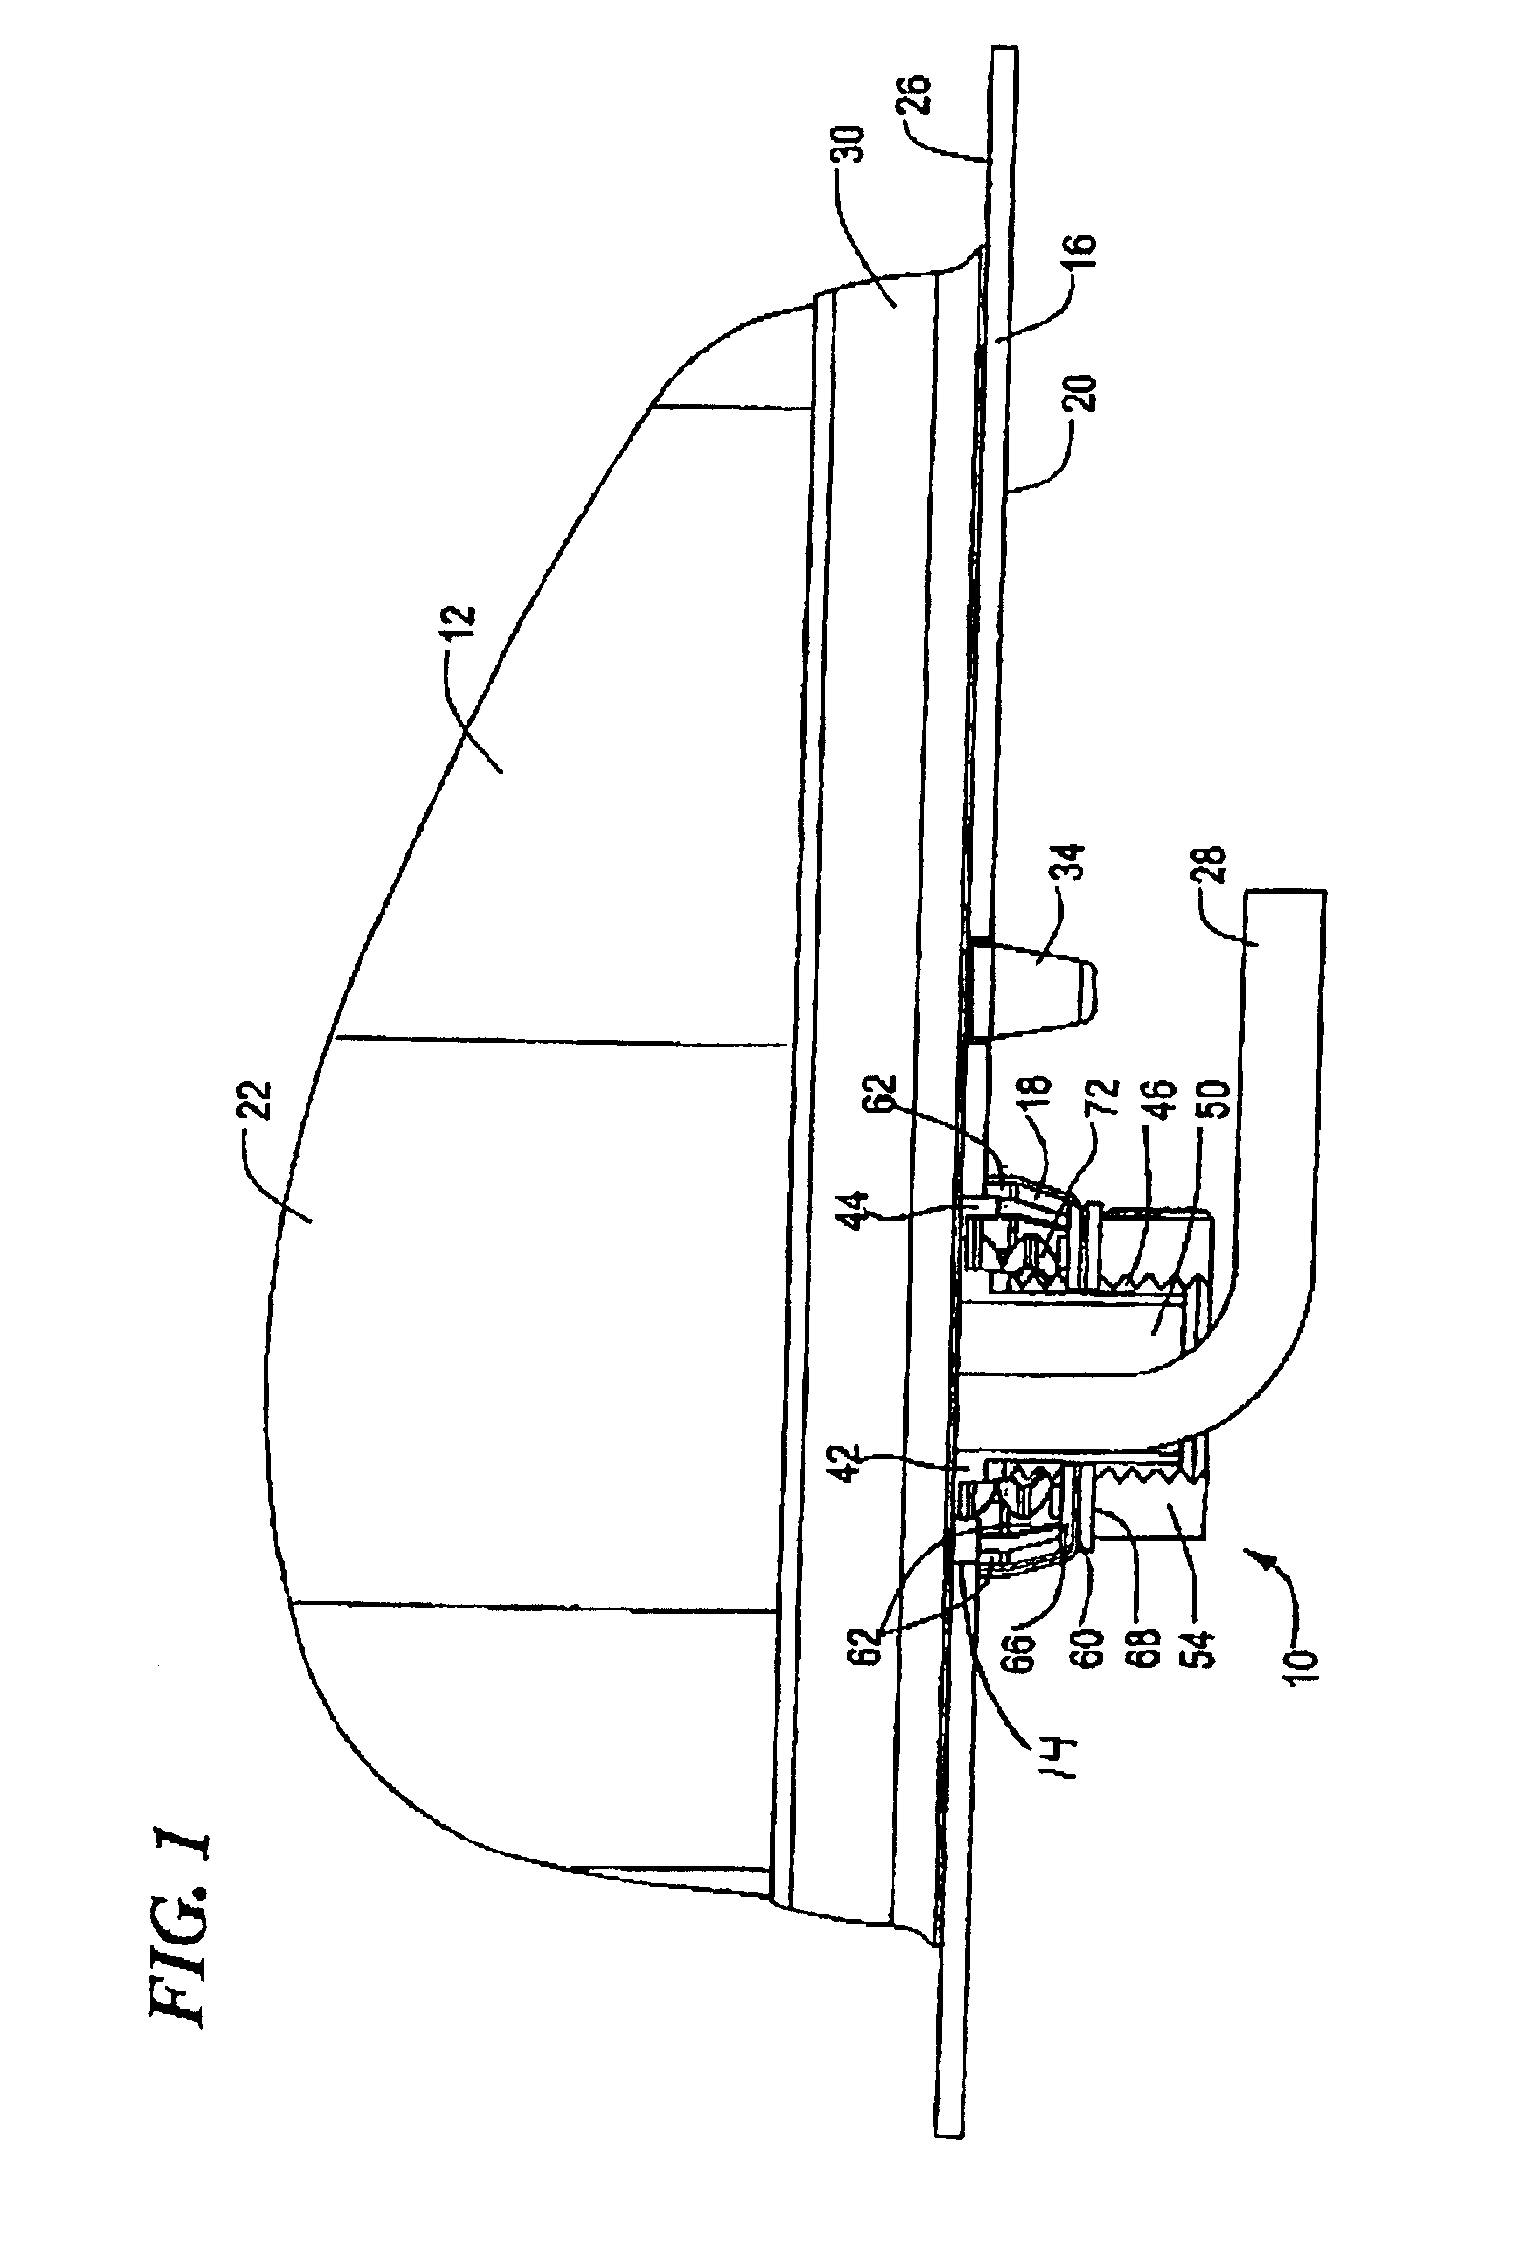 Apparatus and articles of manufacture for an automotive antenna mounting gasket